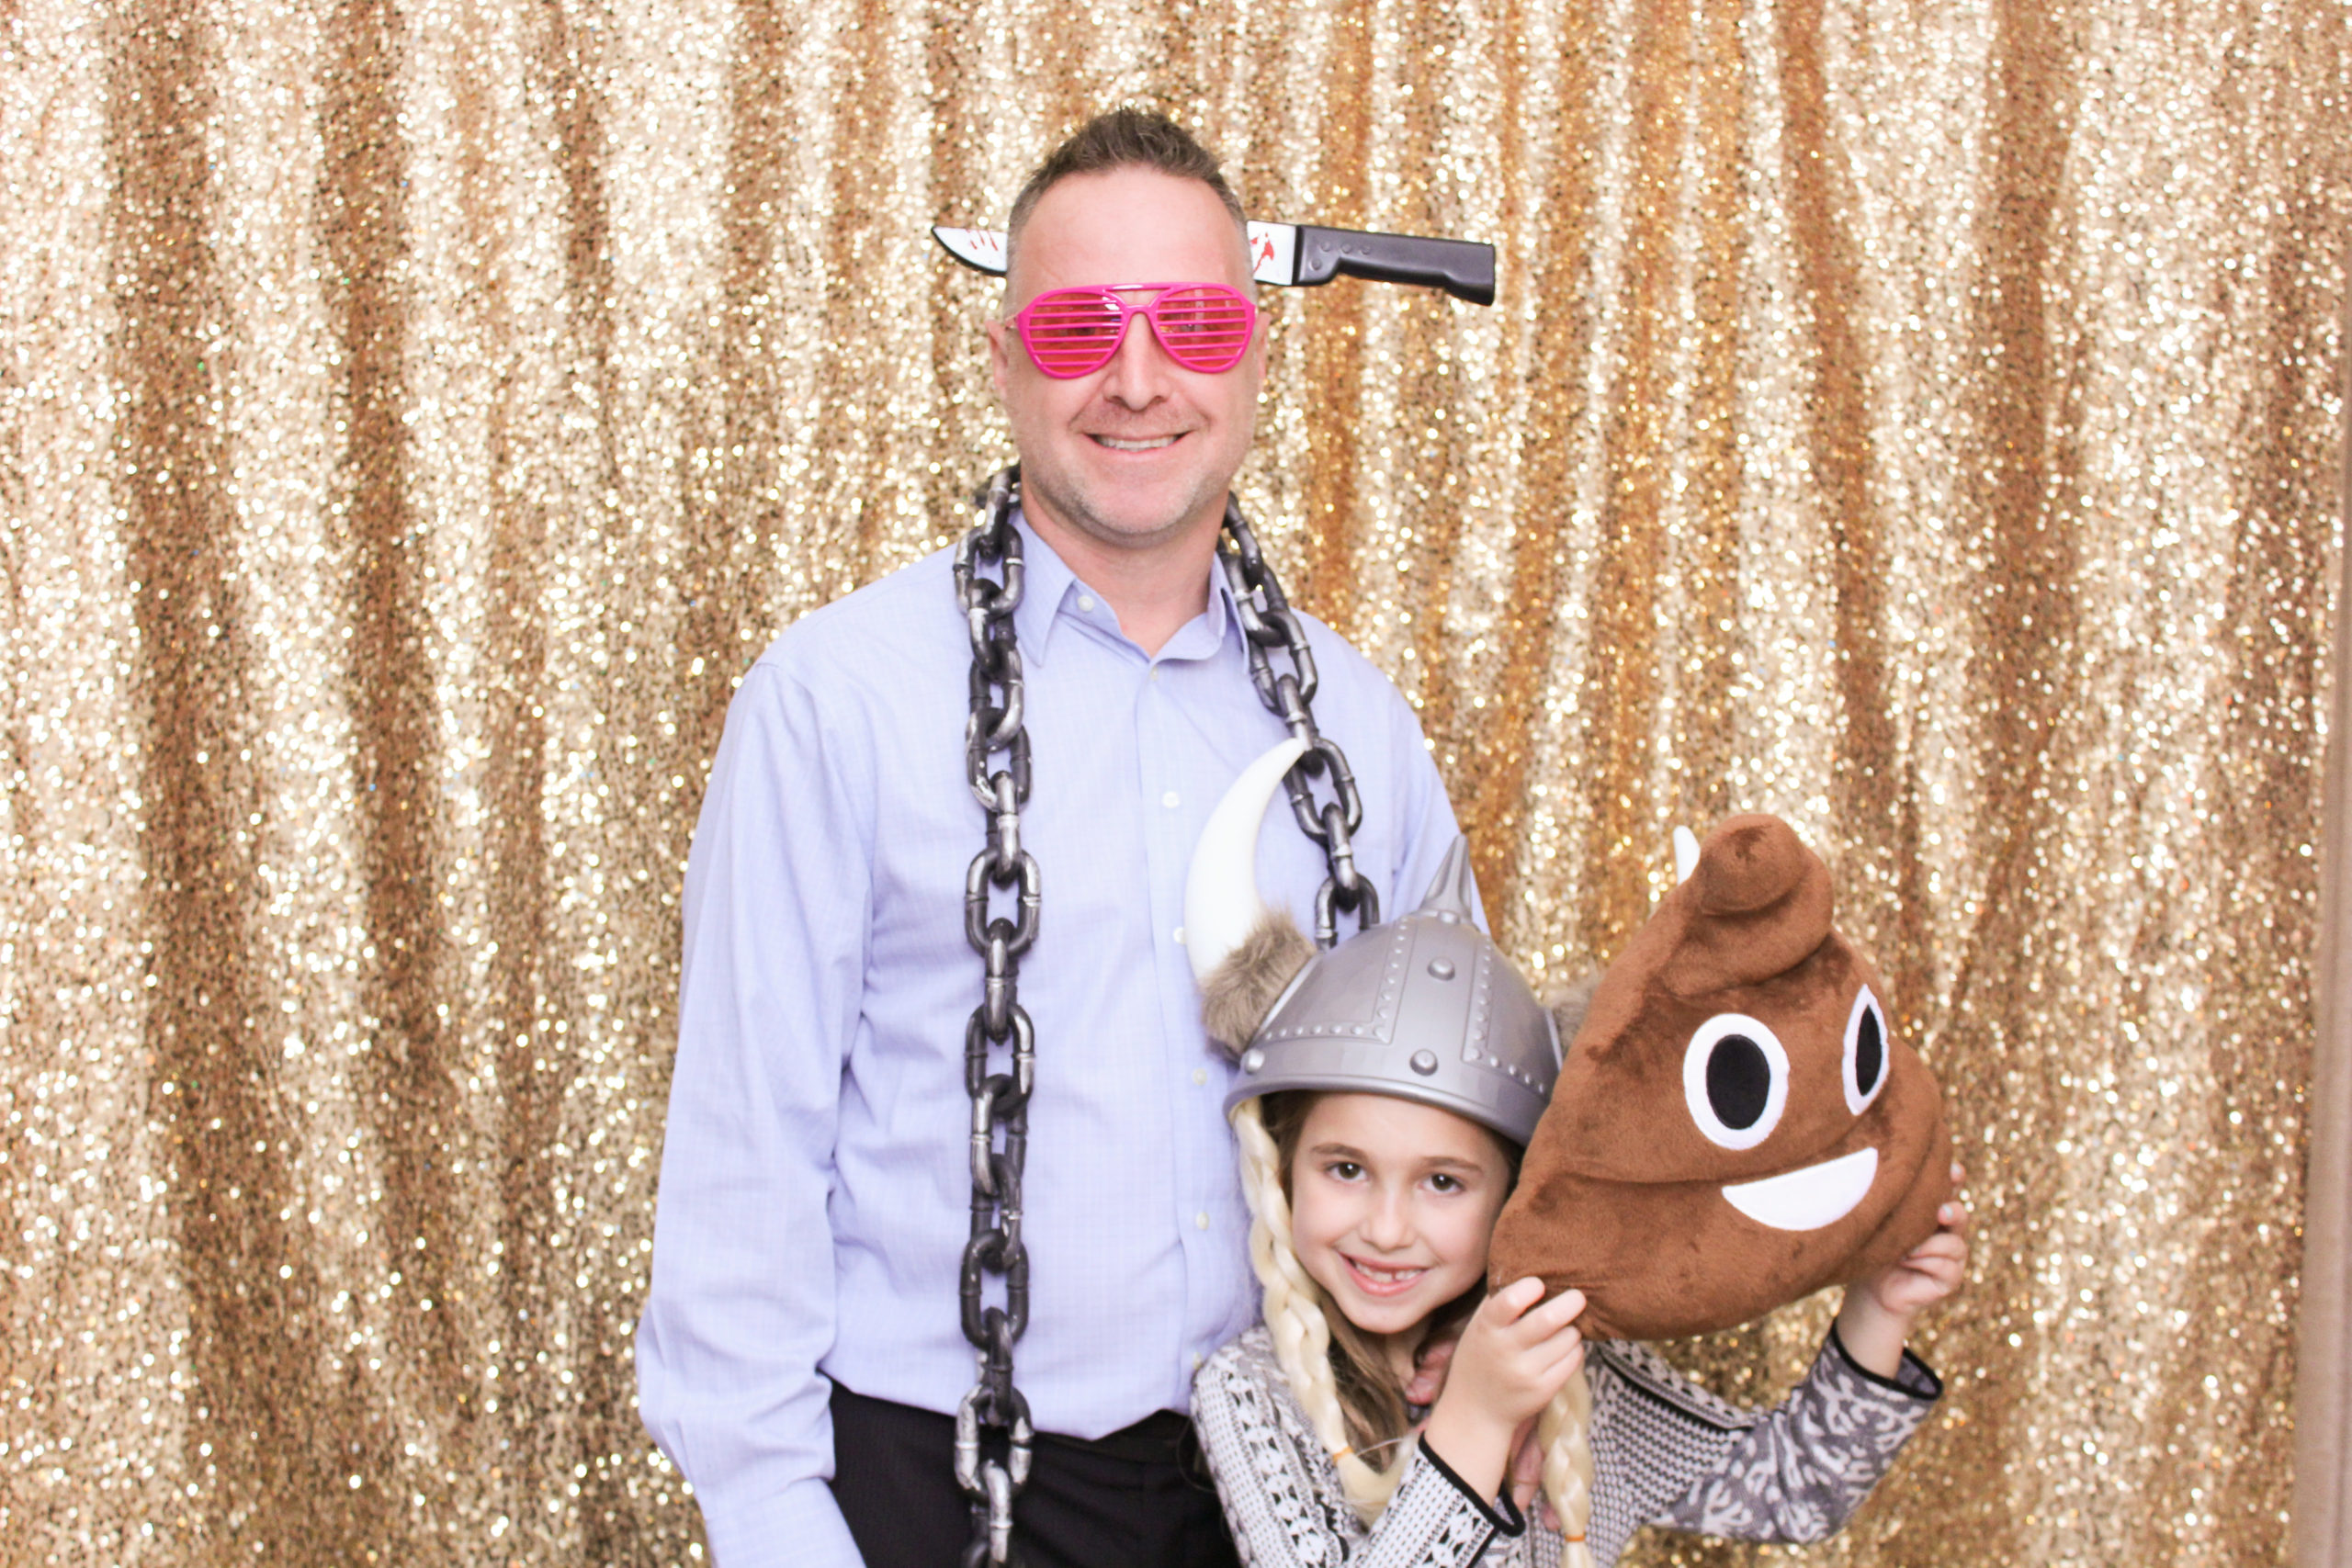 A dad and his daughter using props to have fun in a photo booth rental.